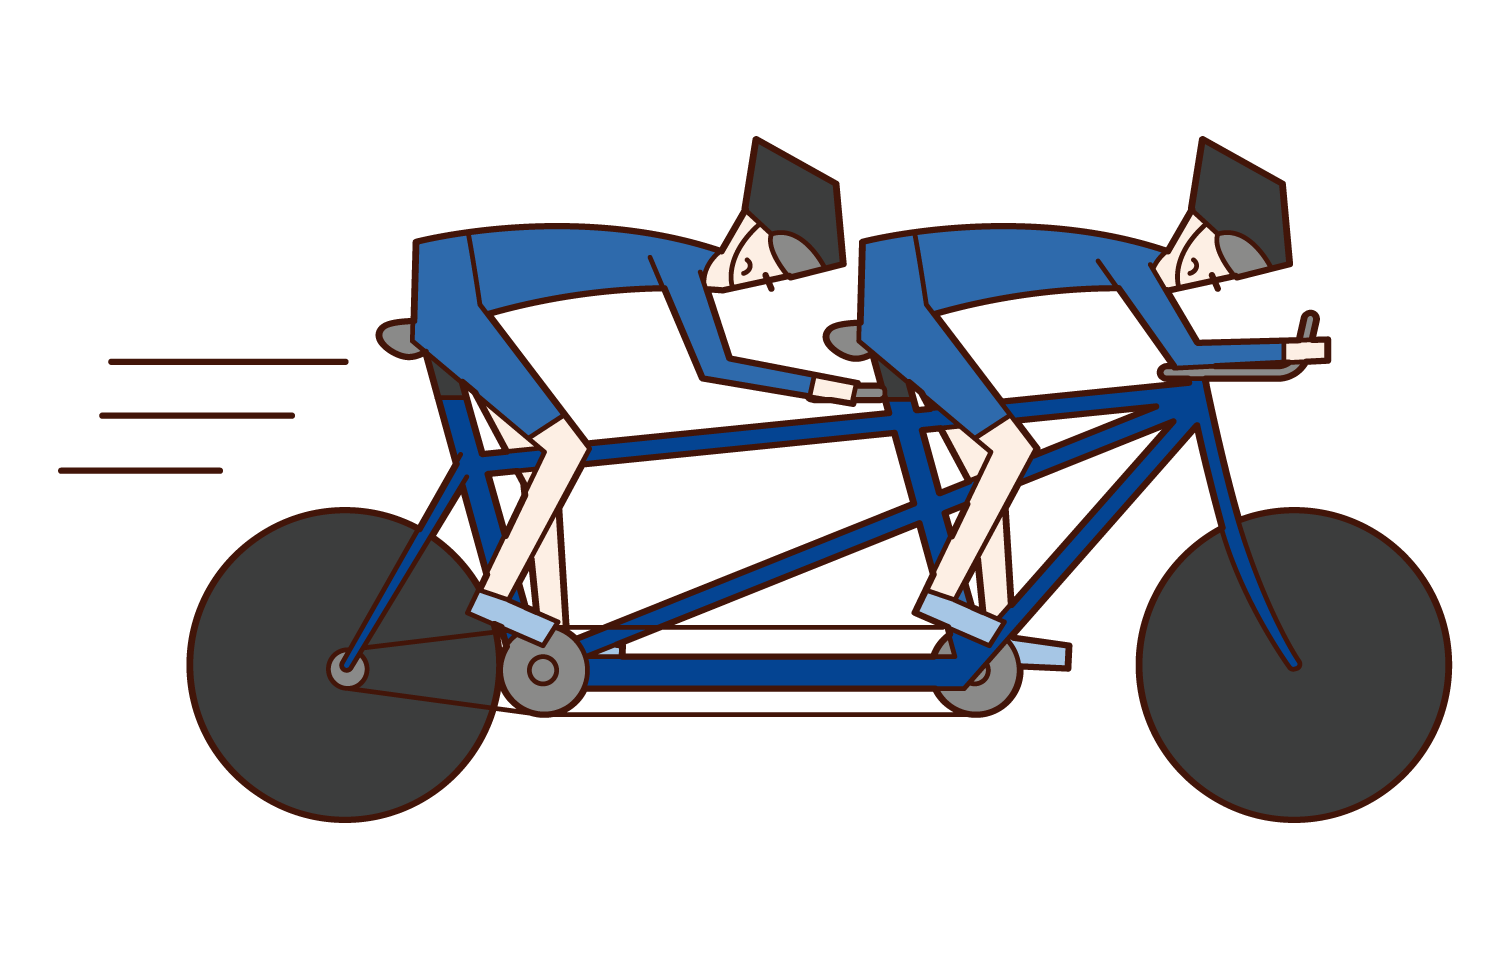 Illustration of Paralympic cyclists (men riding tandem bicycles)